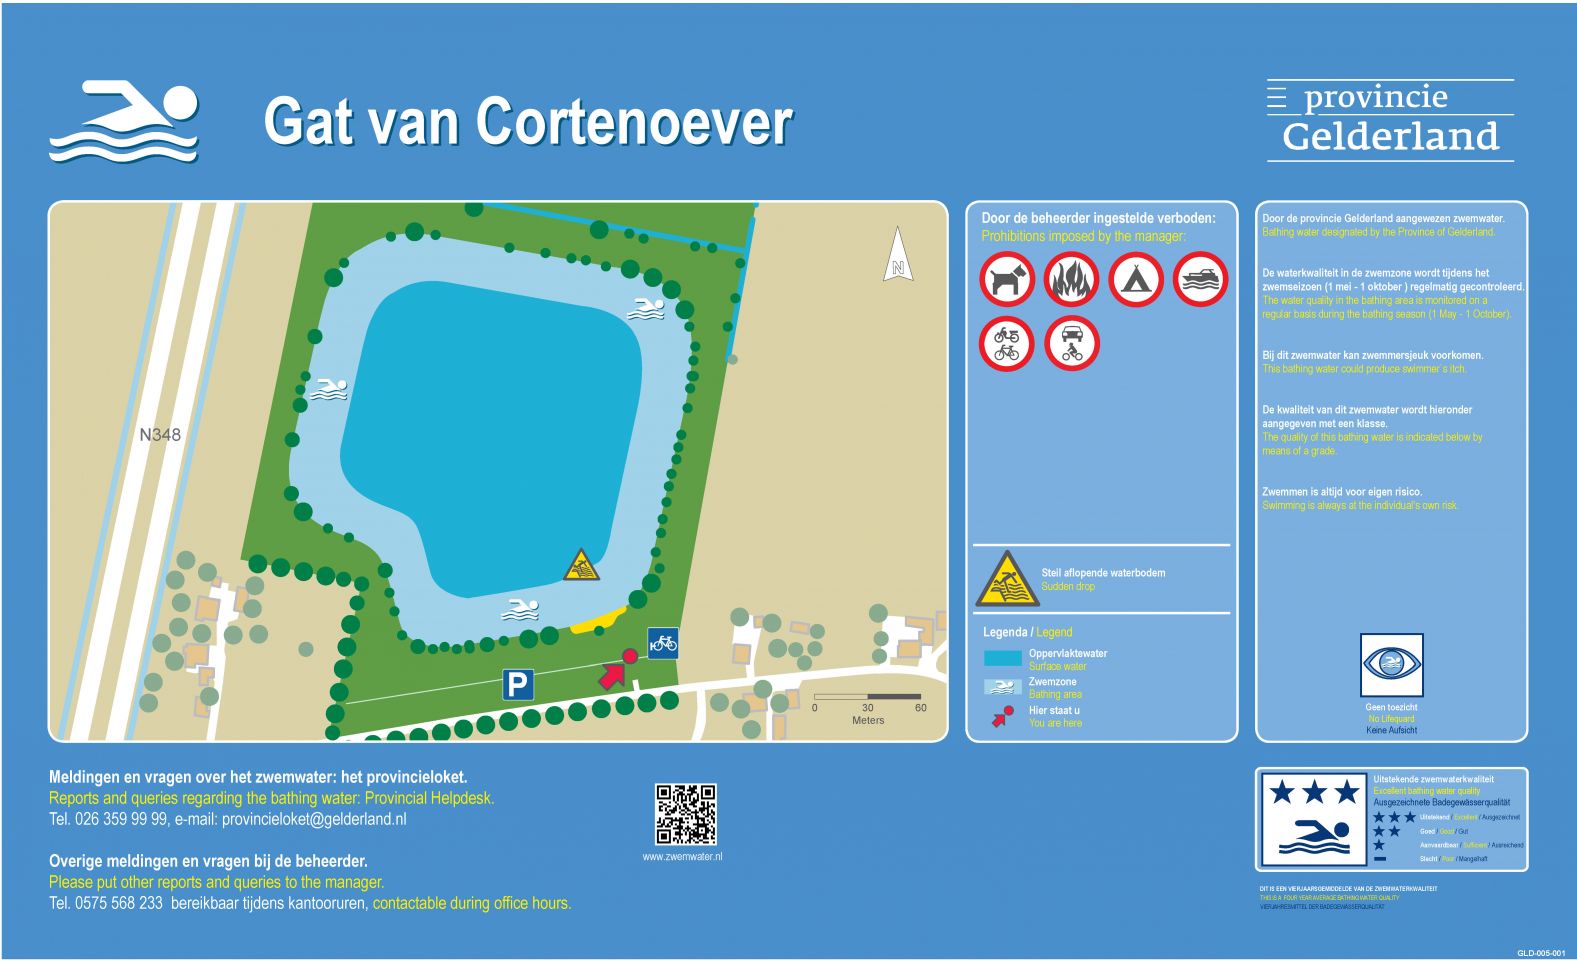 The information board at the swimming location Gat Van Cortenoever